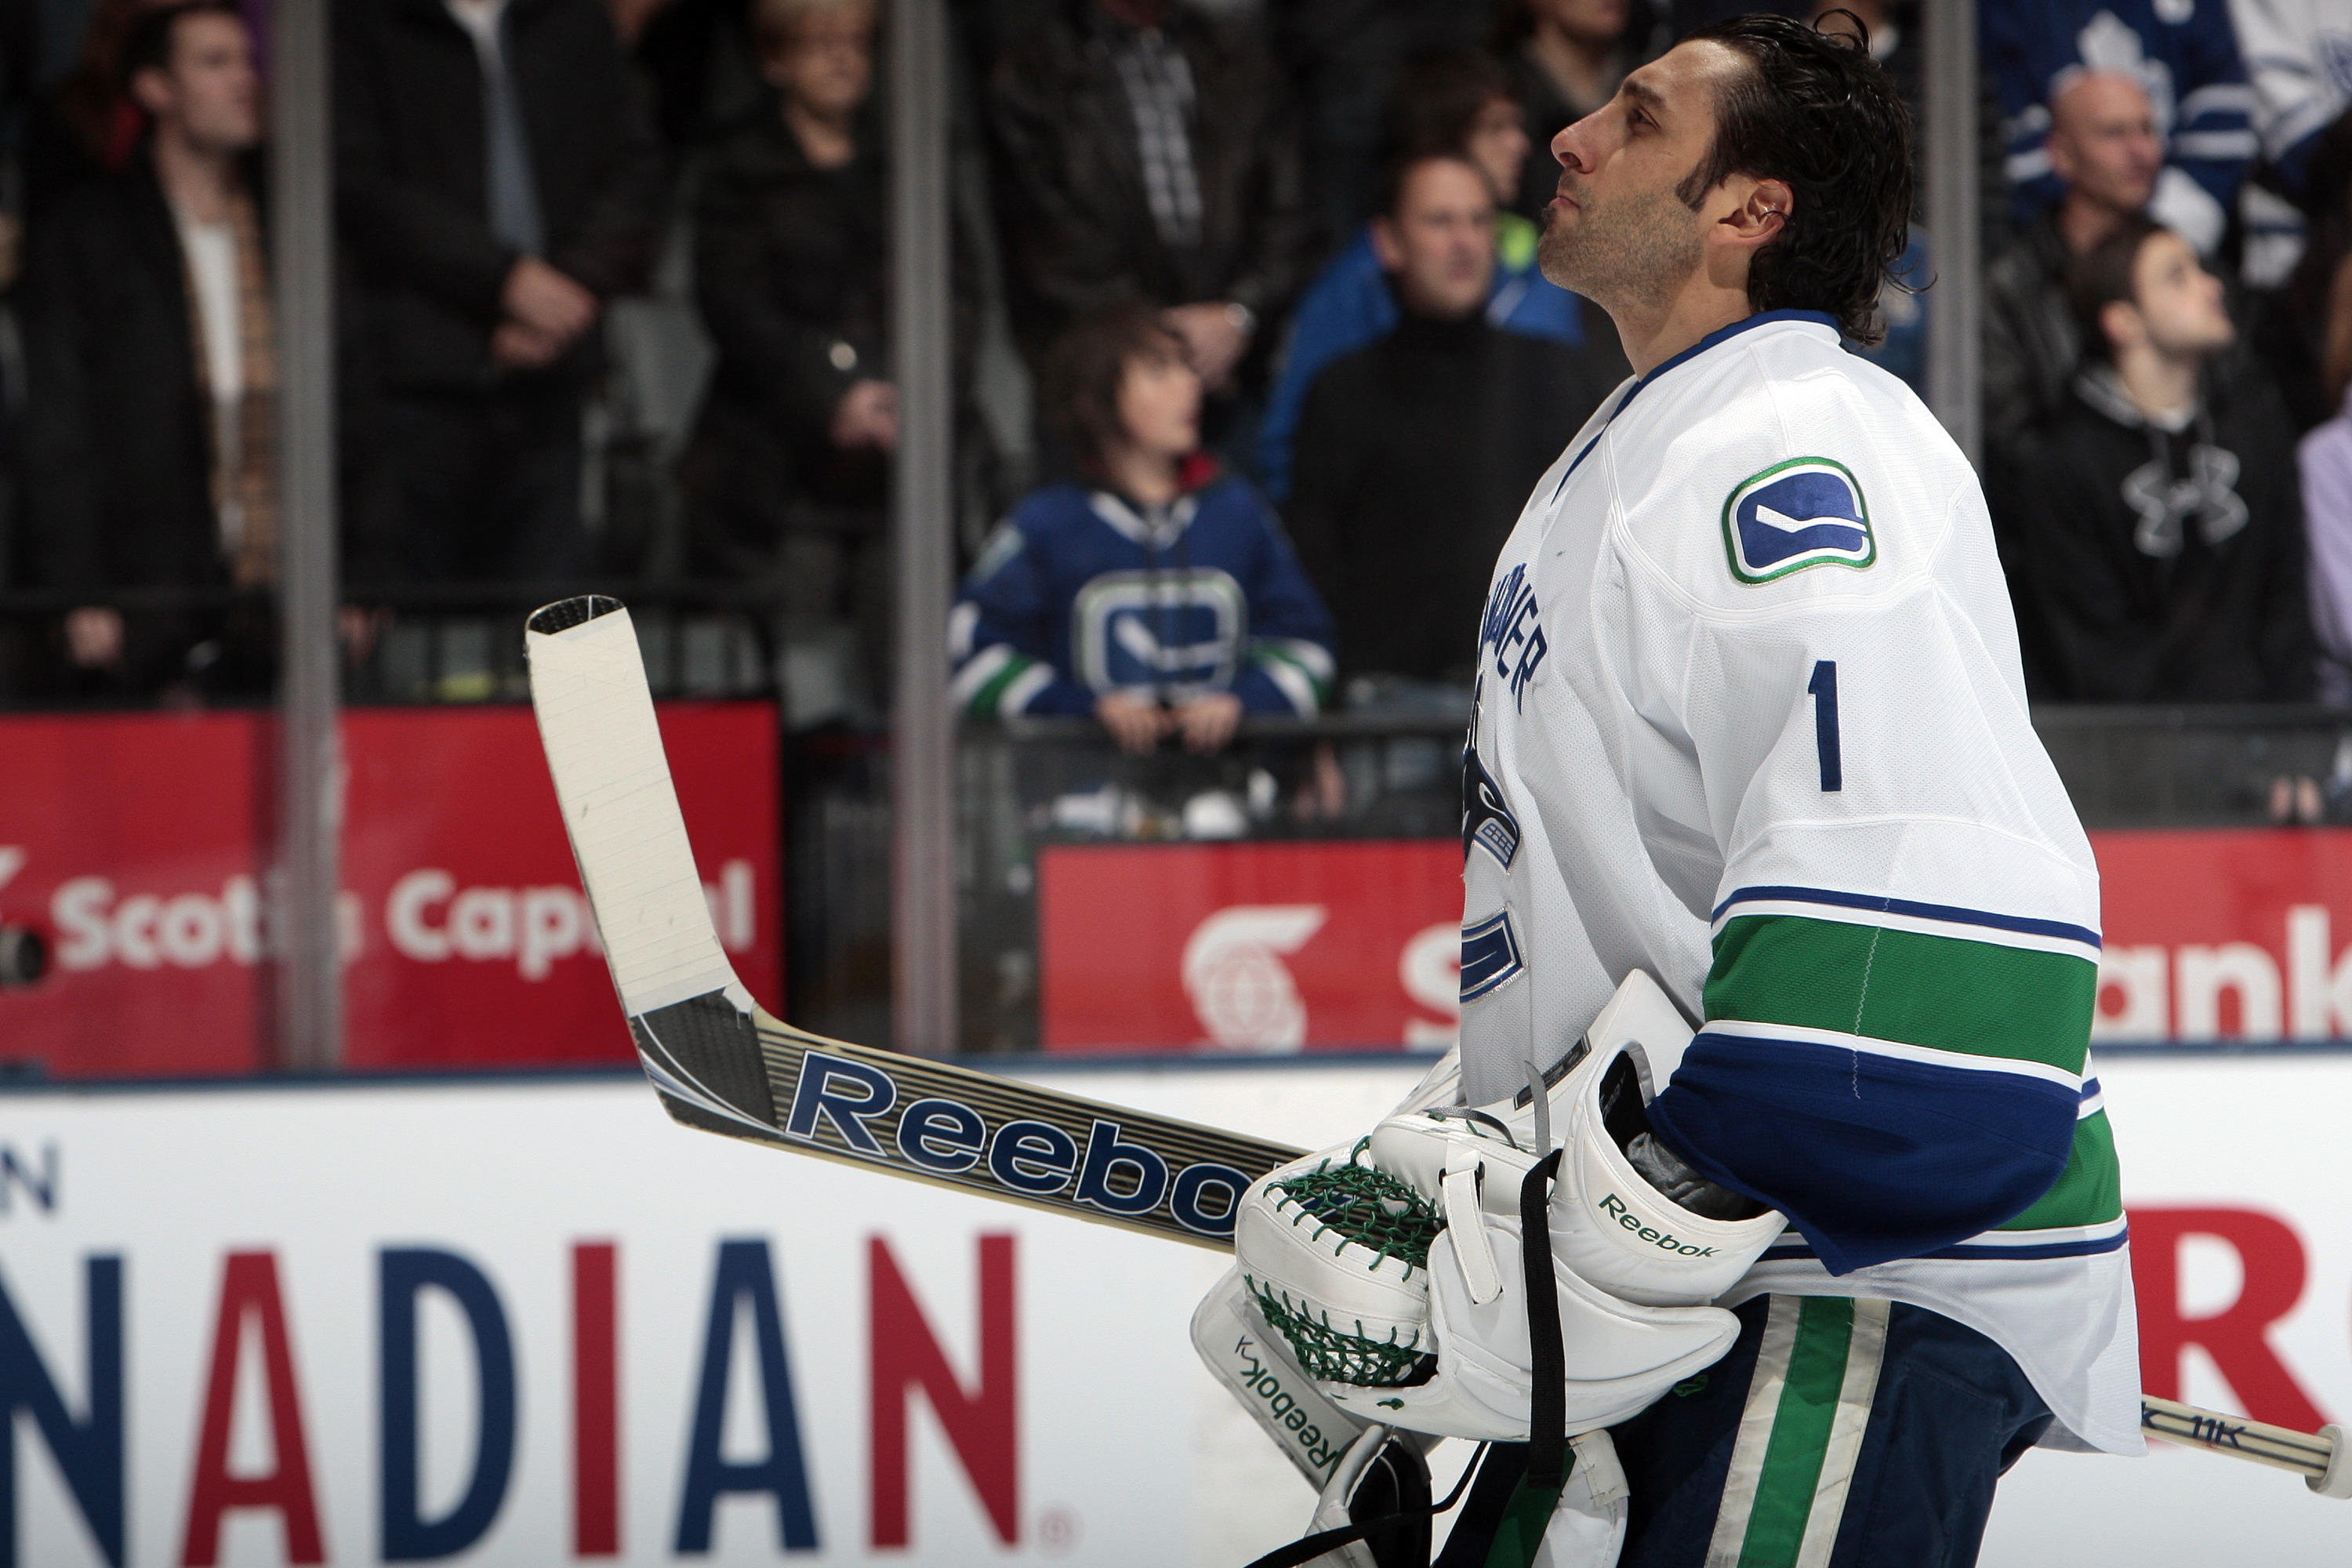 Roberto luongo cant stop nothing